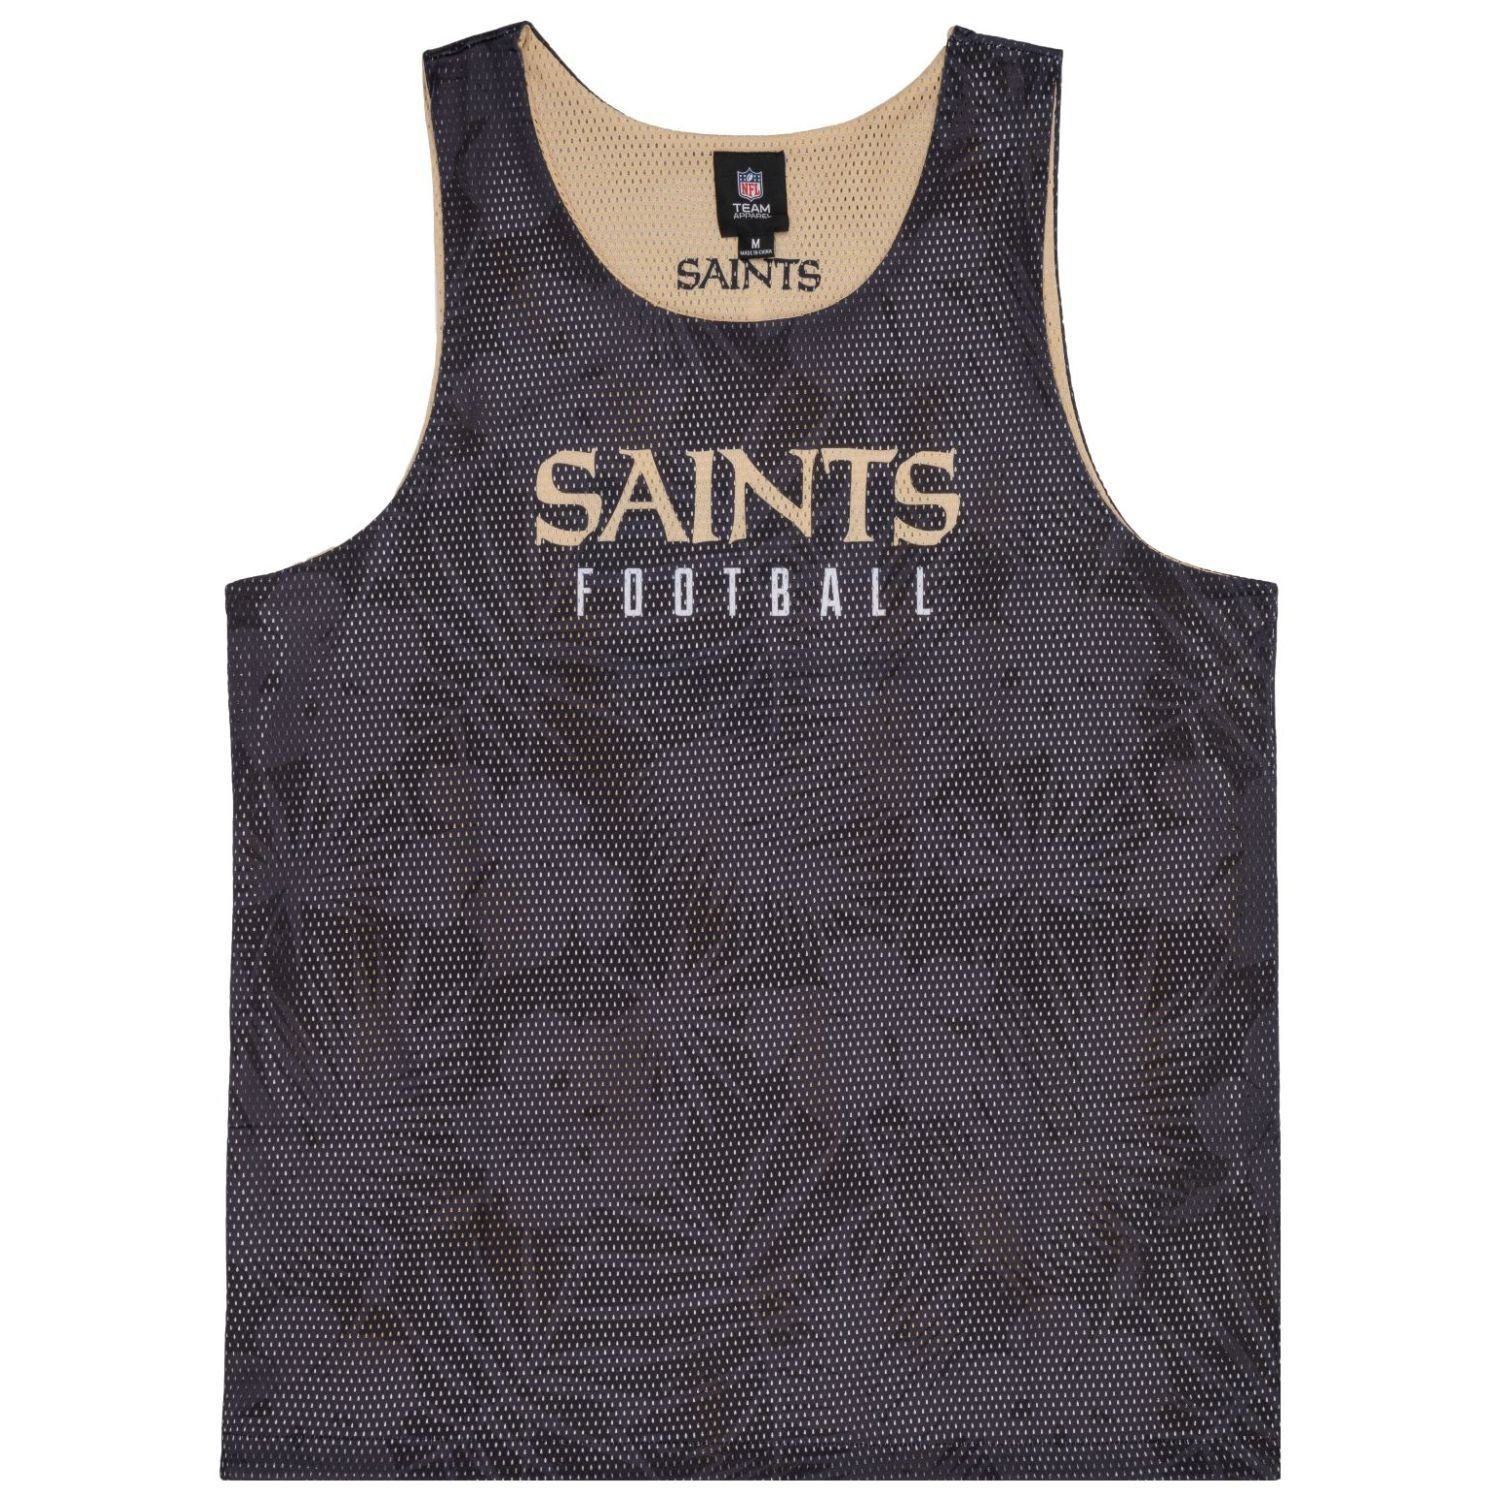 Forever Collectibles Muskelshirt Orleans Saints Floral Reversible New